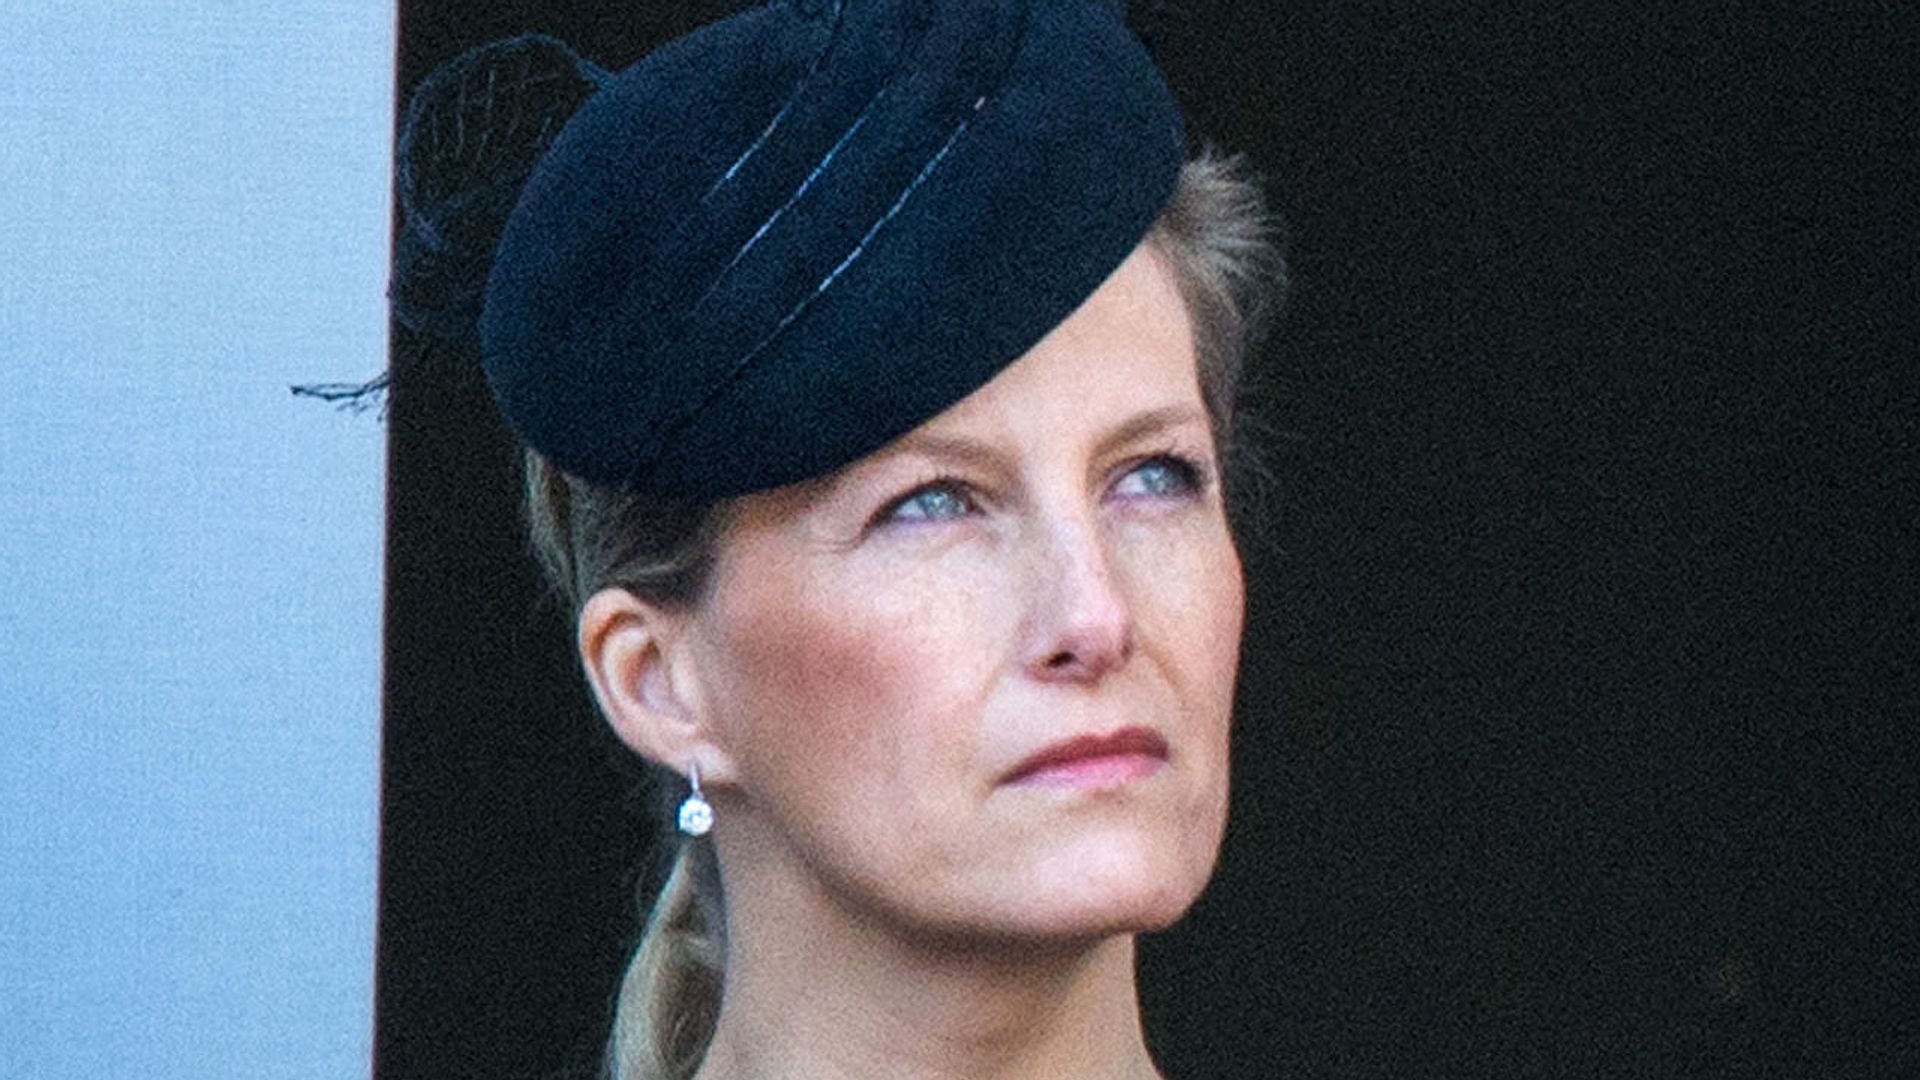 Sophie, Countess of Wessex attending Remembrance Sunday at the Cenotaph on Whitehall on November 11, 2012 